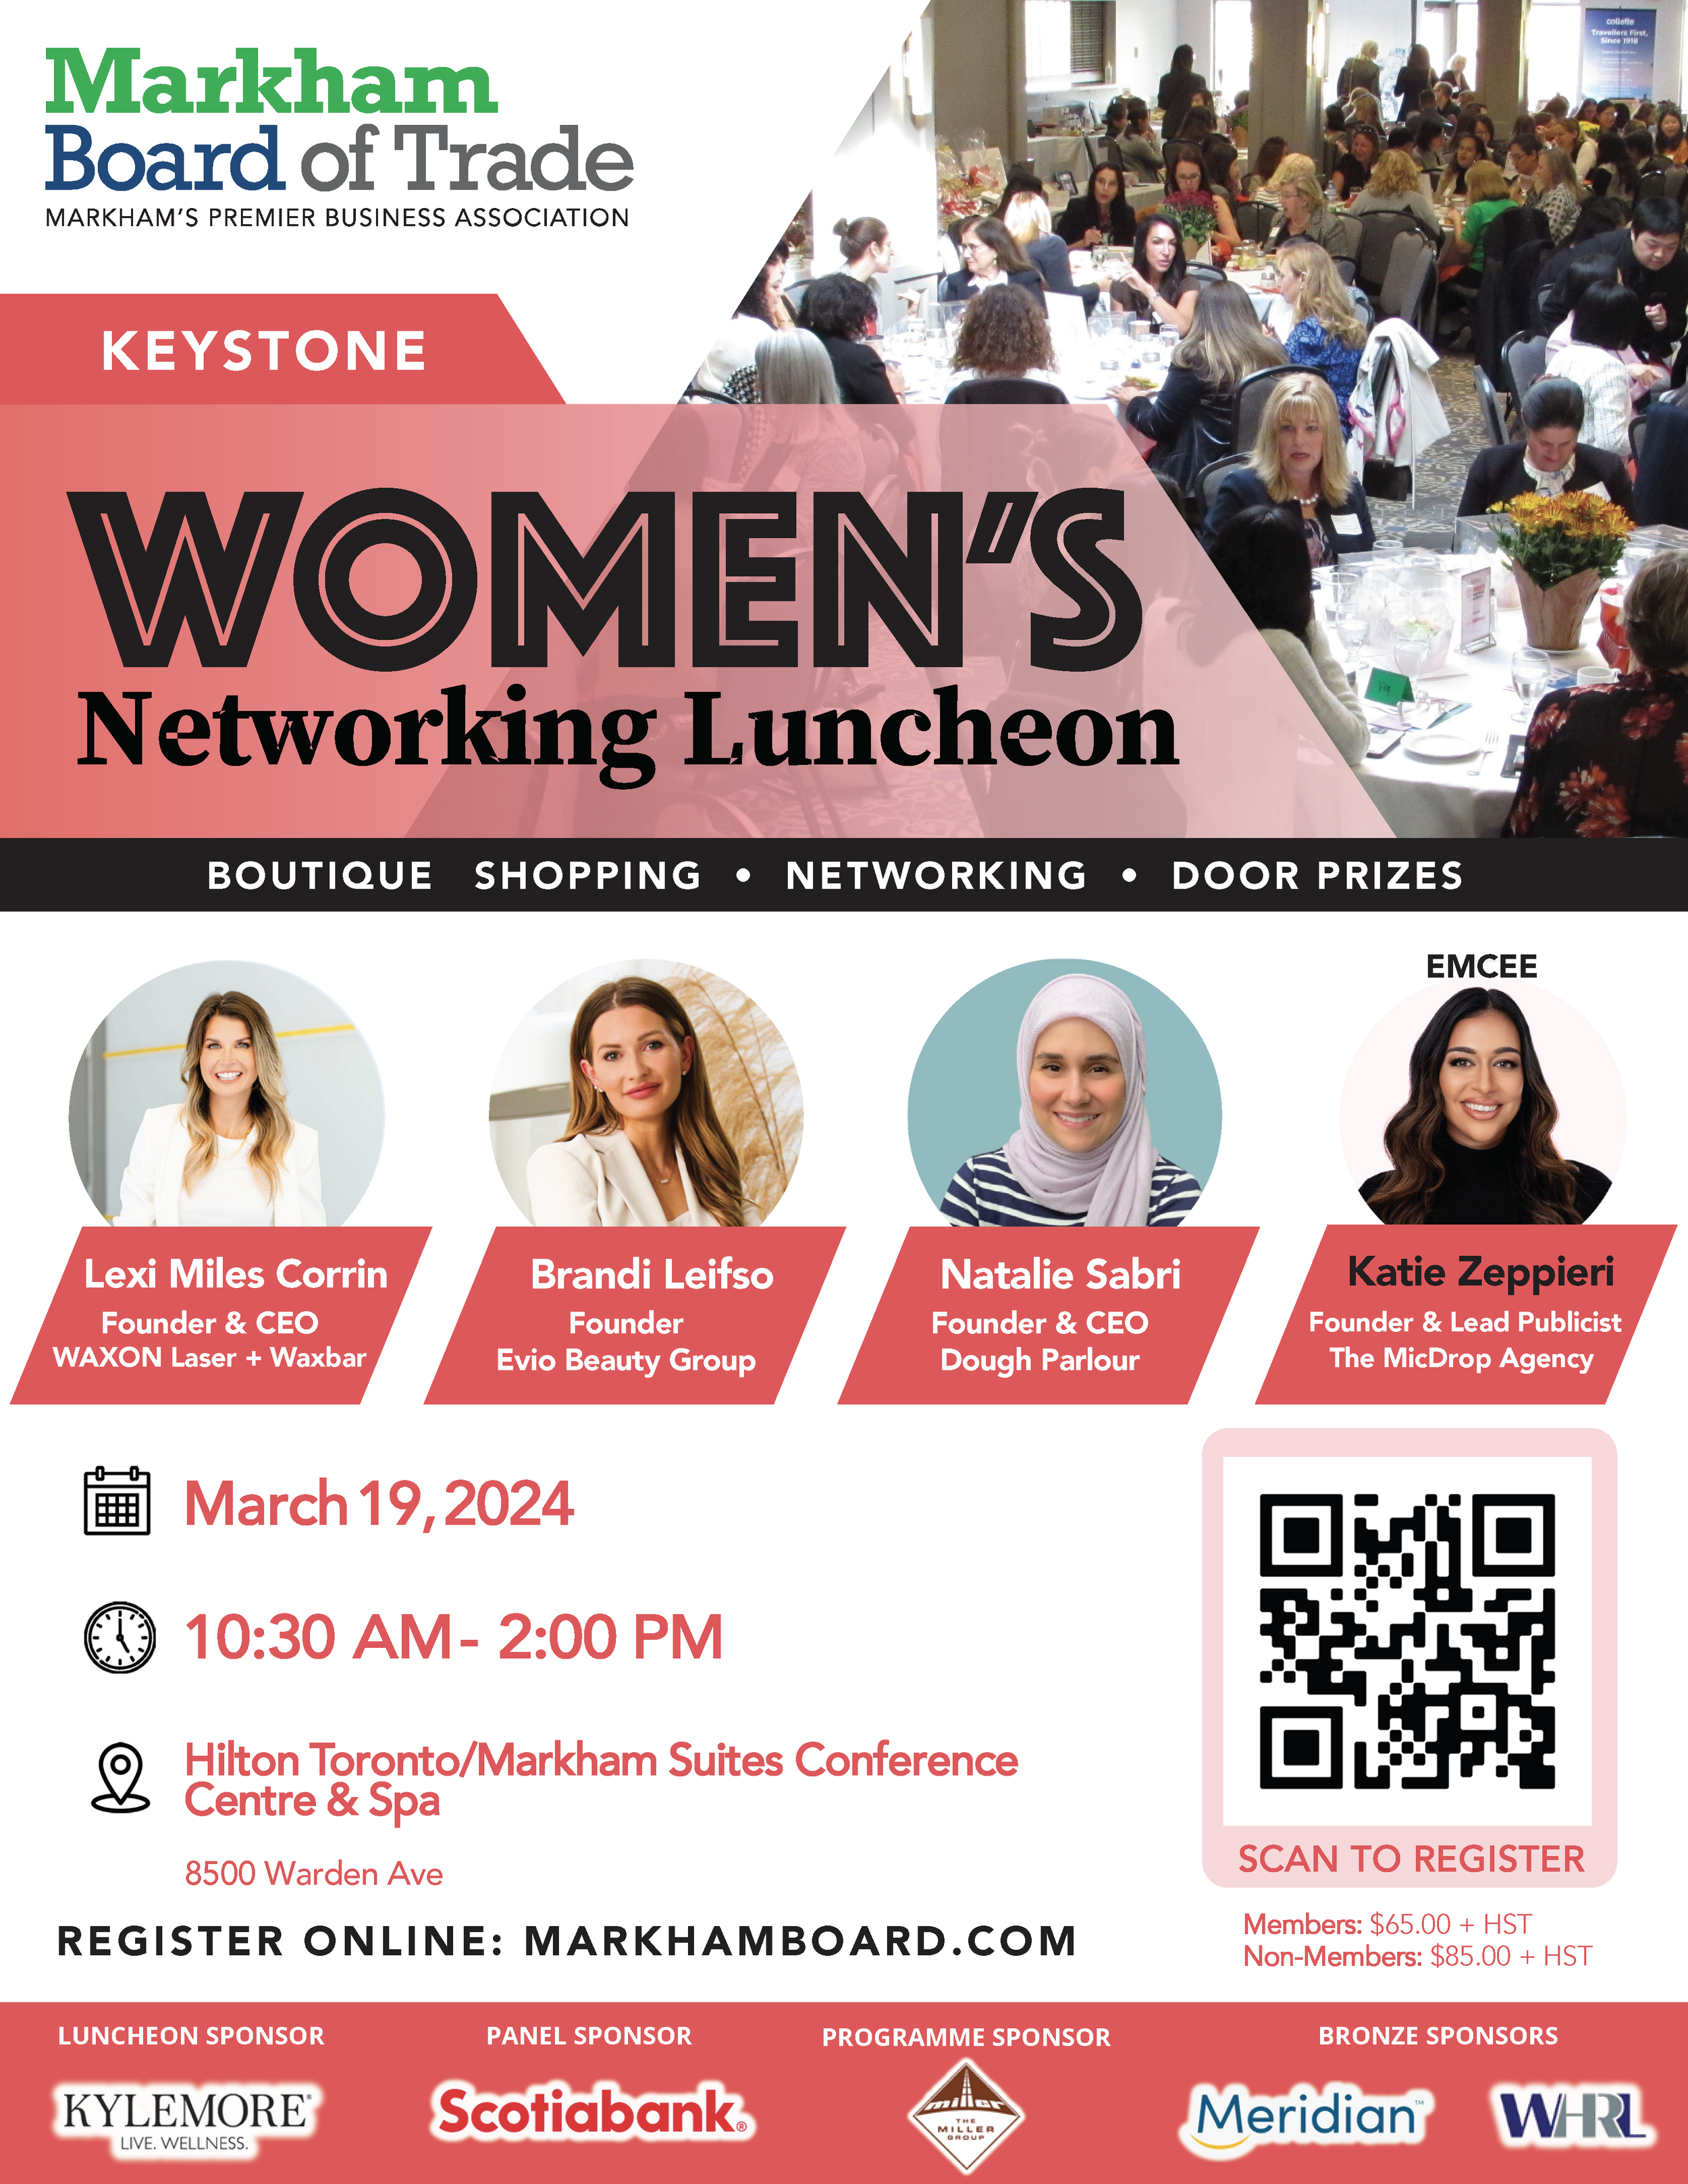 MBT Women's Networking Luncheon Mar 19-24.png